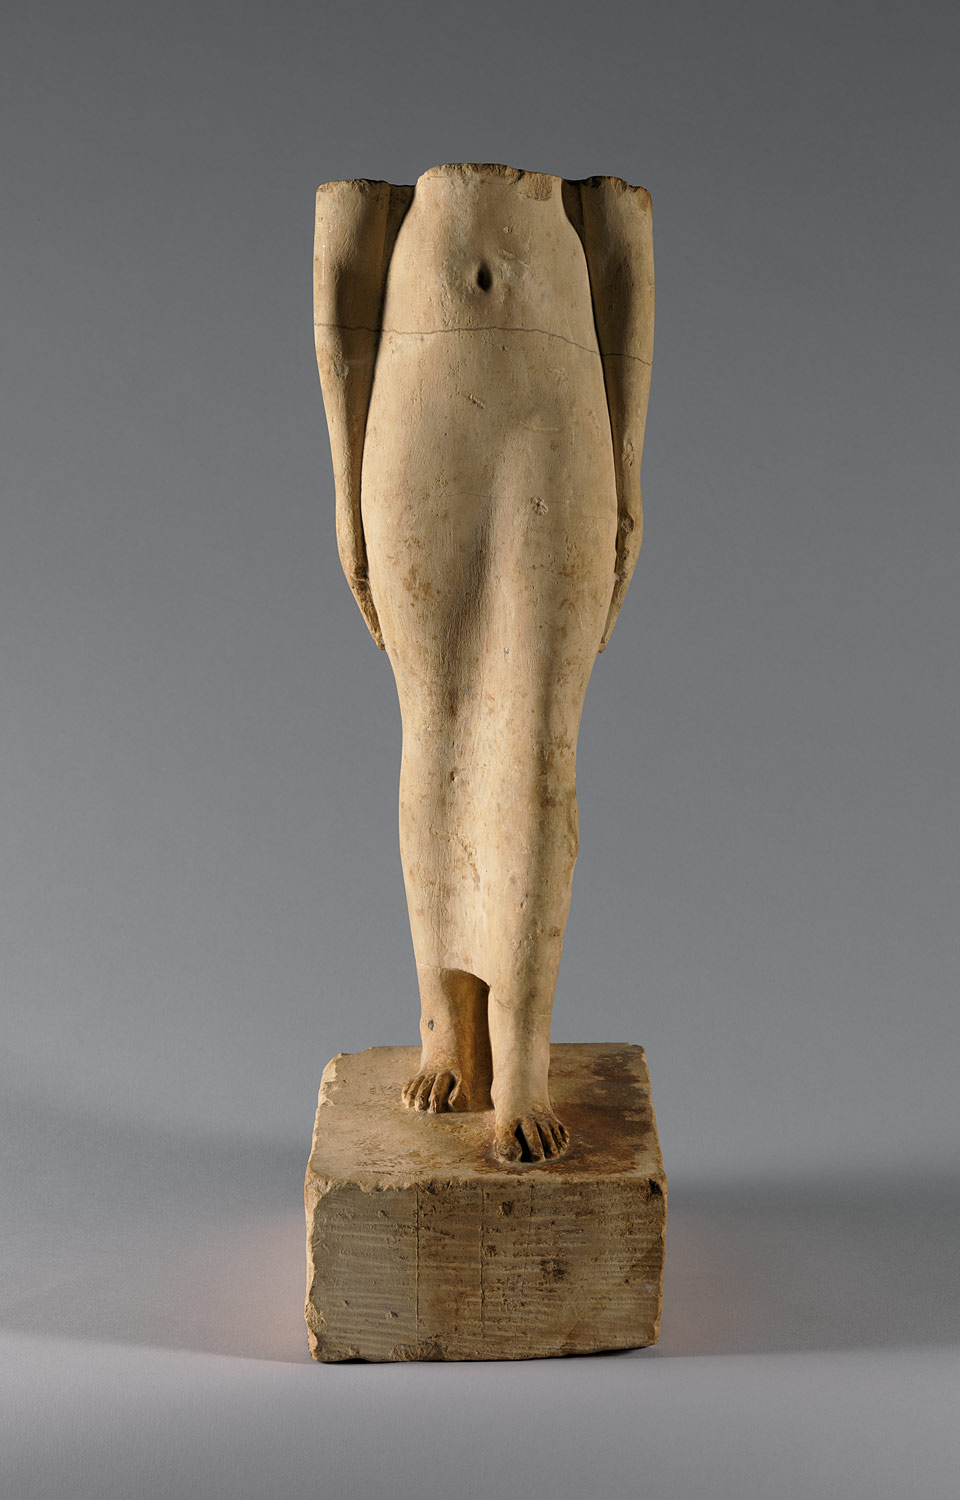 egyptian1 005 Working Title/Artist: Torso of a priestess Department: Egyptian Art Culture/Period/Location: HB/TOA Date Code: 04 Working Date: 306–246 B.C. photography by mma, Digital File DP224655.tif retouched by film and media (apd) __4_21_11